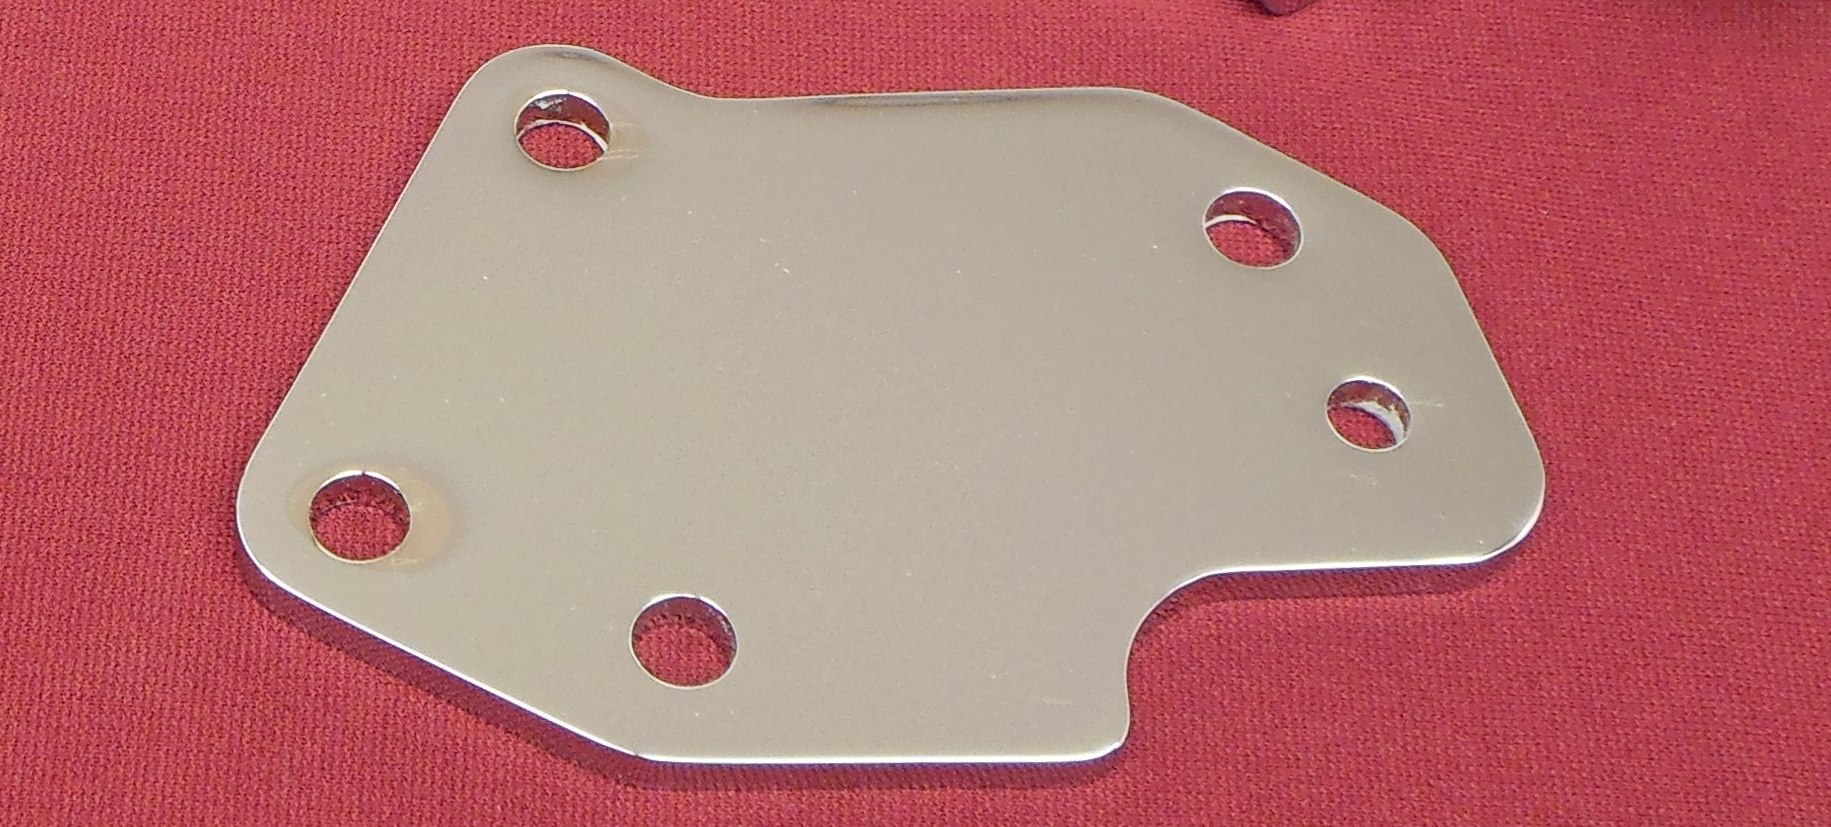 Kickstand Bracket Replacement Plate Chrome - Click Image to Close